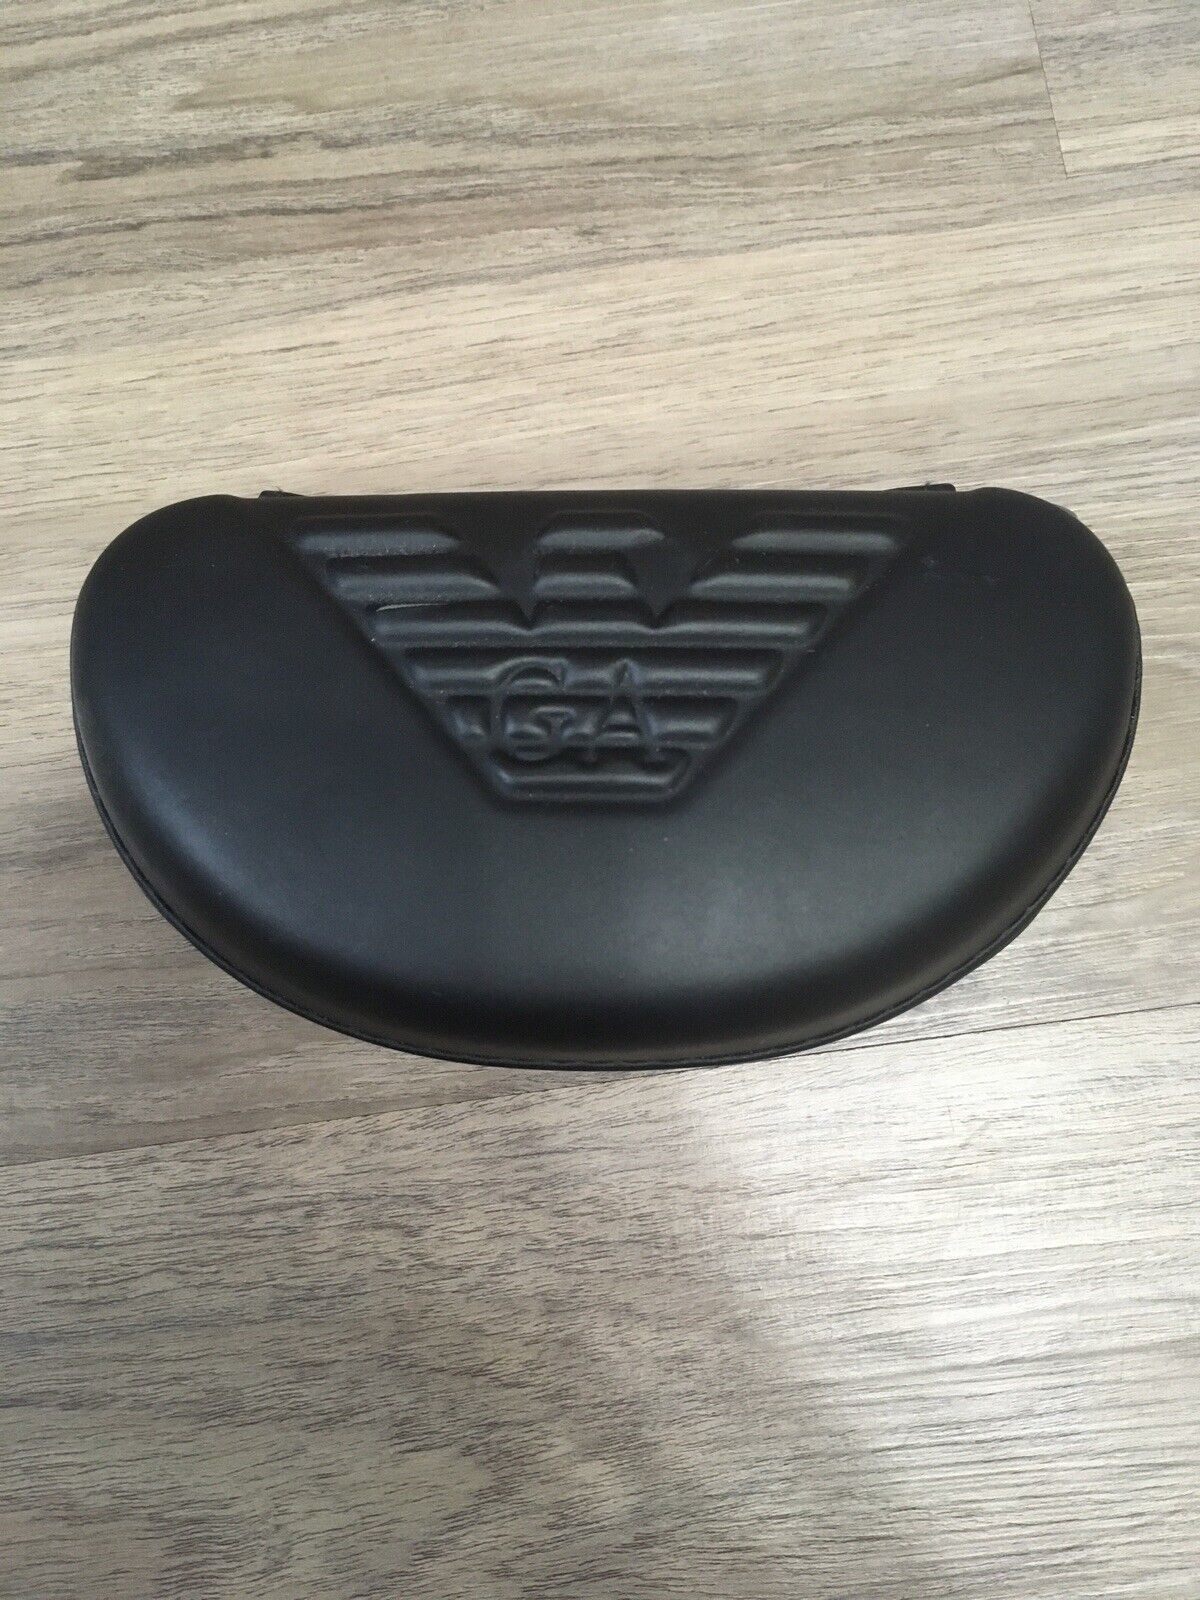 Giorgio Armani Sunglasses Case Only Black Faux Leather Zip Up Softcase - $20.35